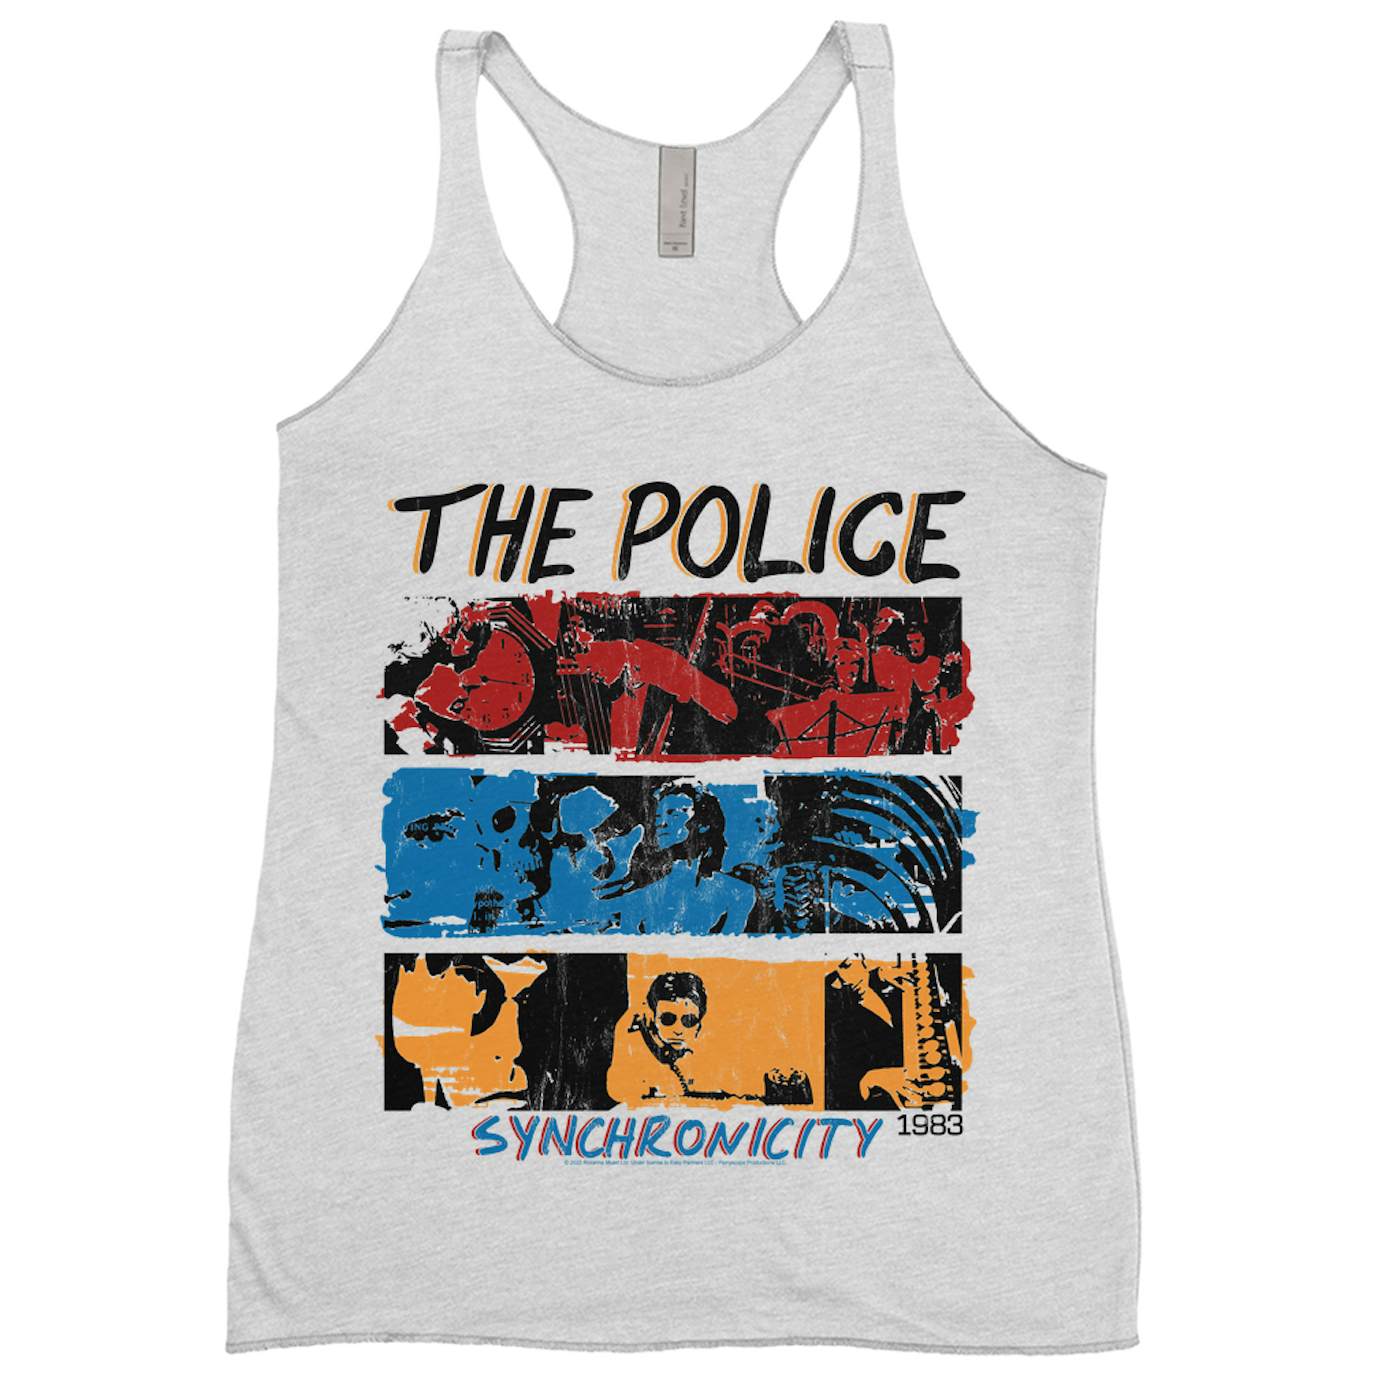 The Police Ladies' Tank Top | 1983 Synchronicity Tour Distressed (Merchbar Exclusive) The Police Shirt